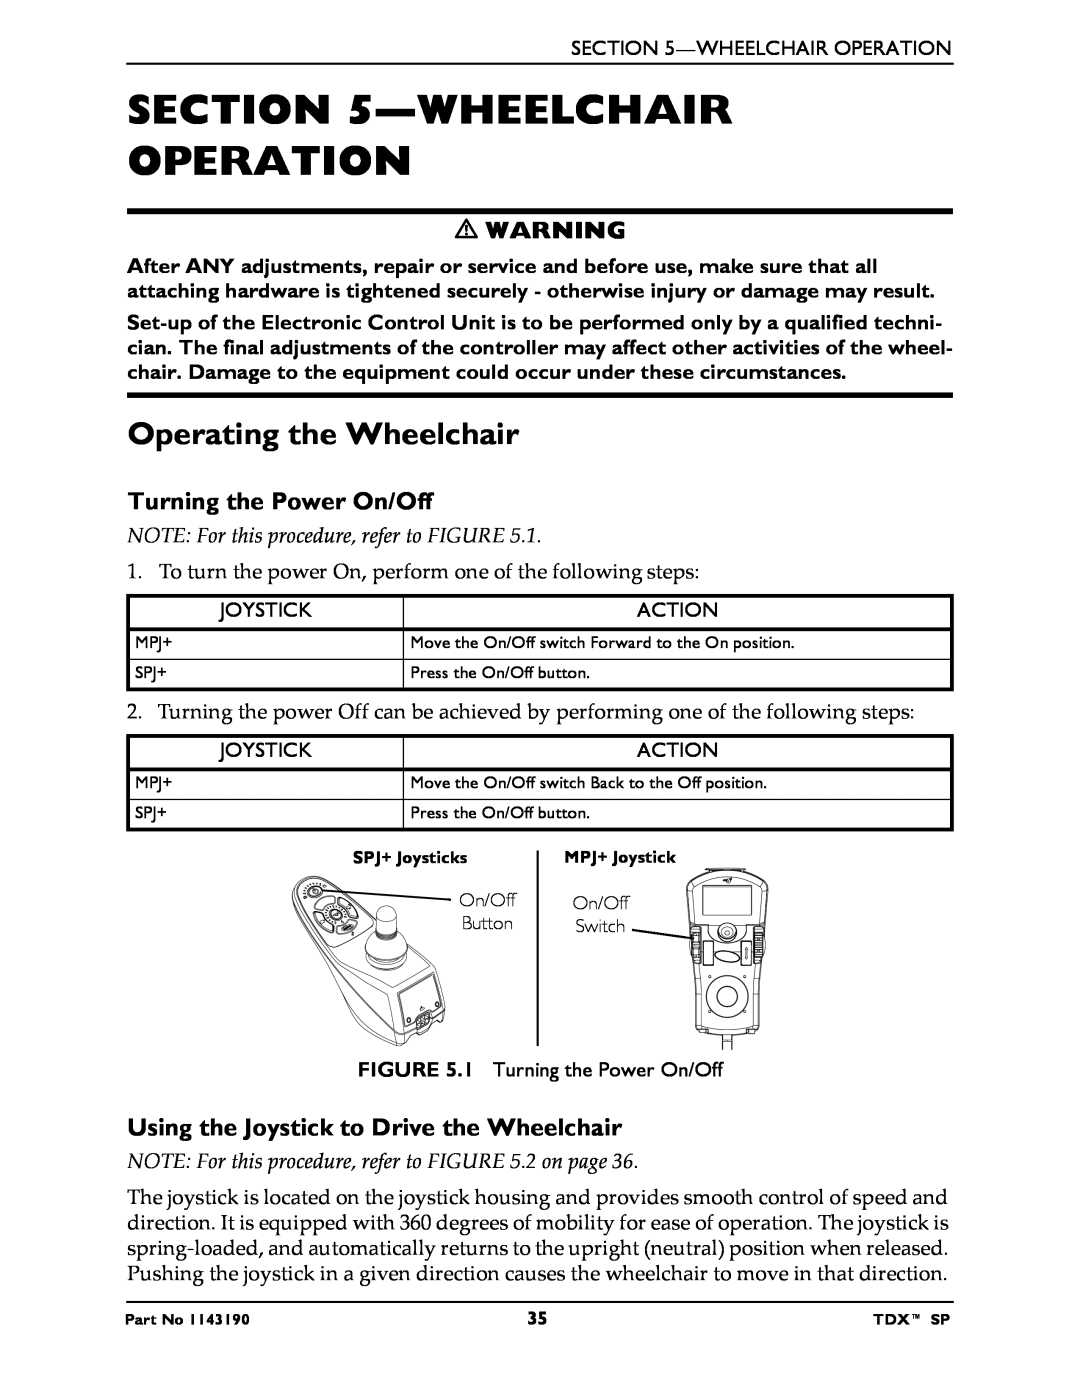 Invacare SP manual Wheelchair Operation, Operating the Wheelchair, NOTE For this procedure, refer to FIGURE 